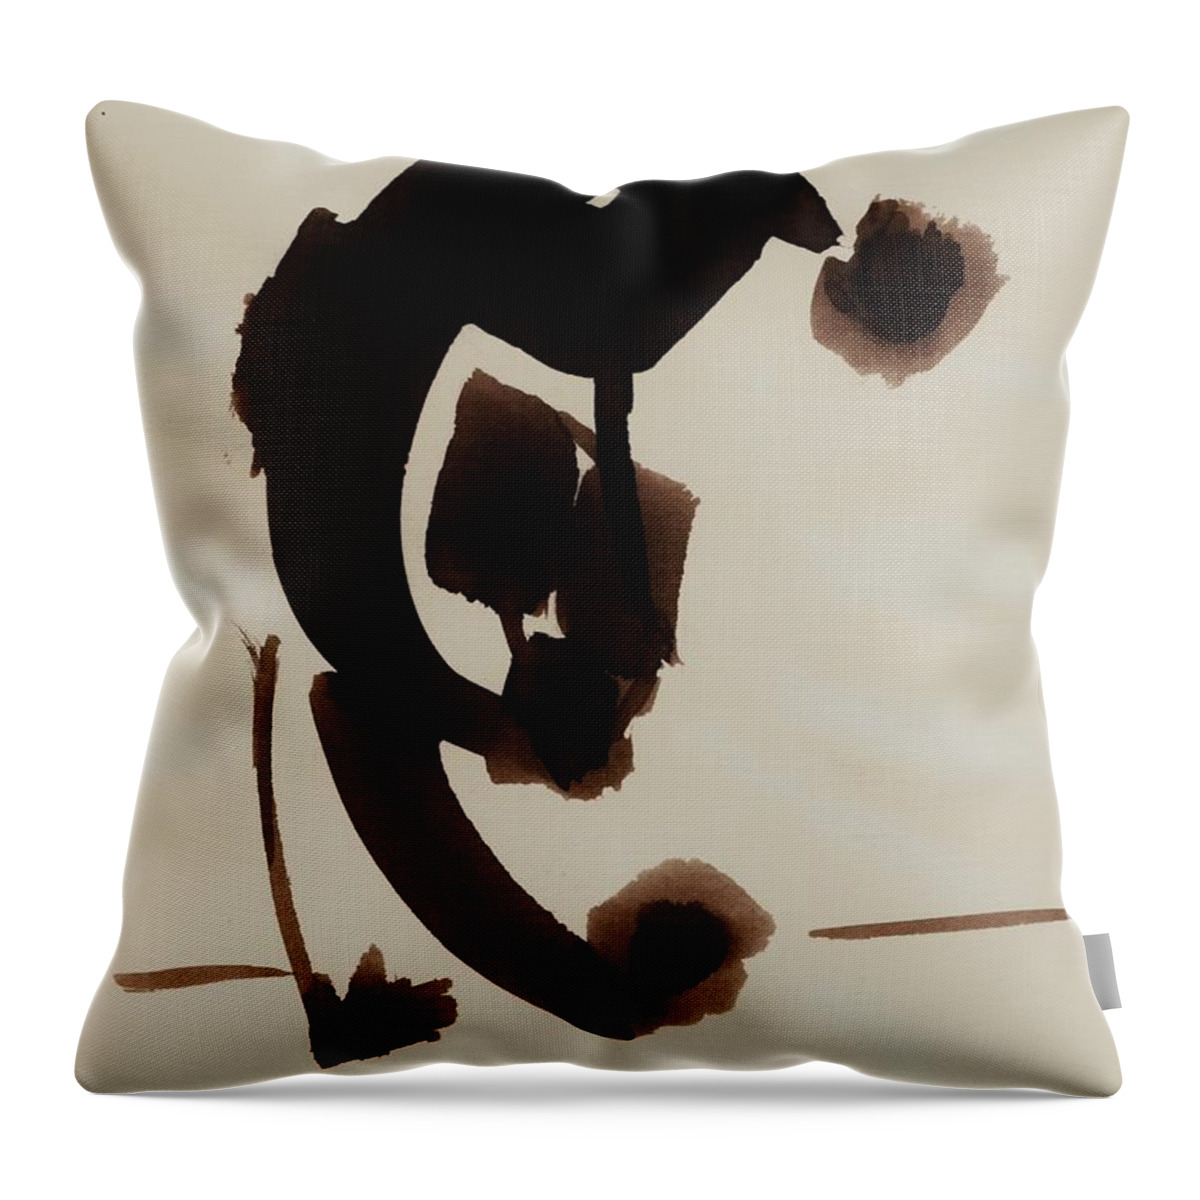 Illustration Throw Pillow featuring the drawing Subjection by Karina Plachetka